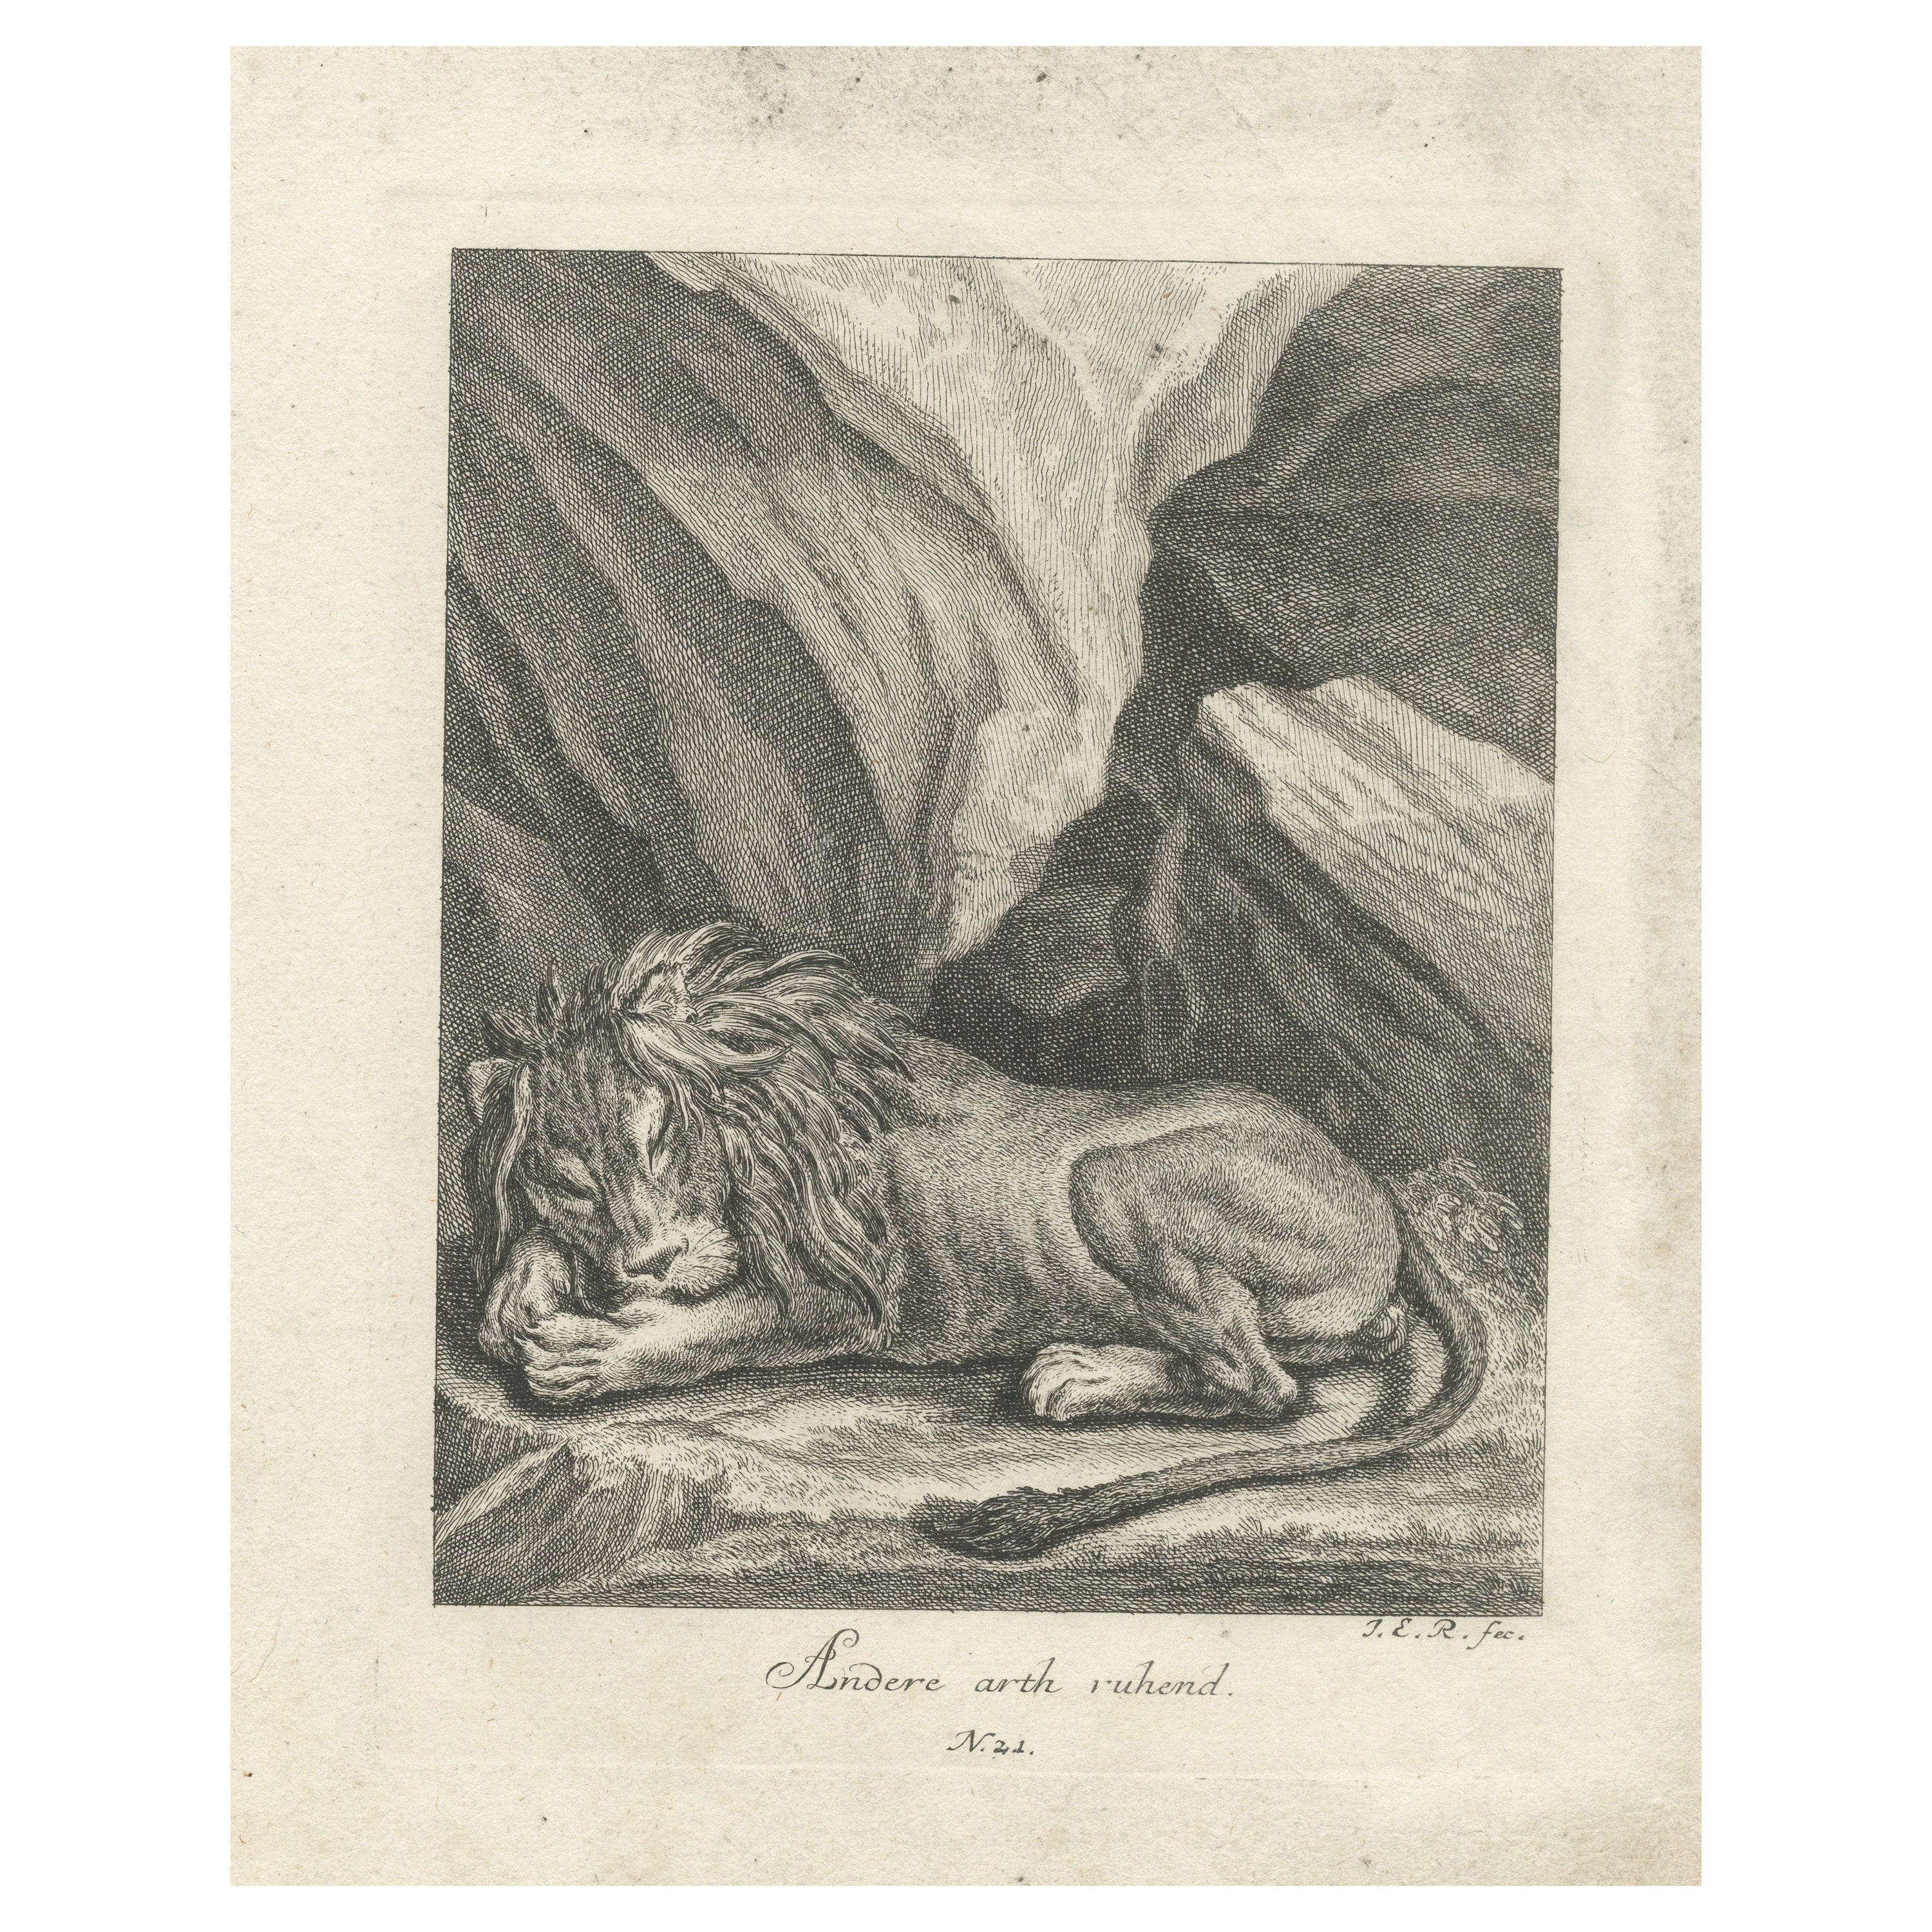 Antique Print of a sleeping Lion in a mountainous landscape For Sale